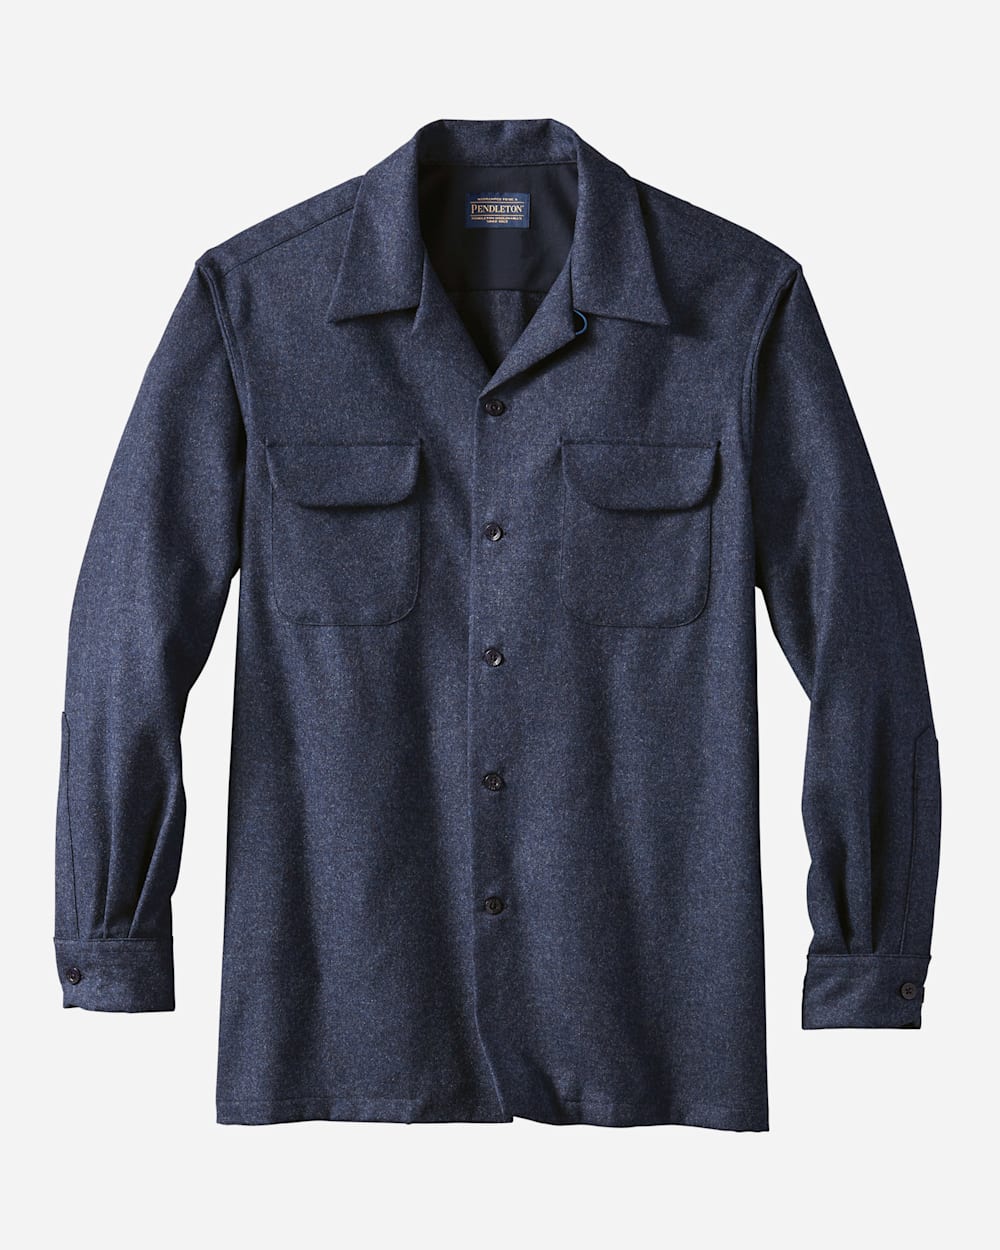 MEN'S BOARD SHIRT IN NAVY MIX image number 1